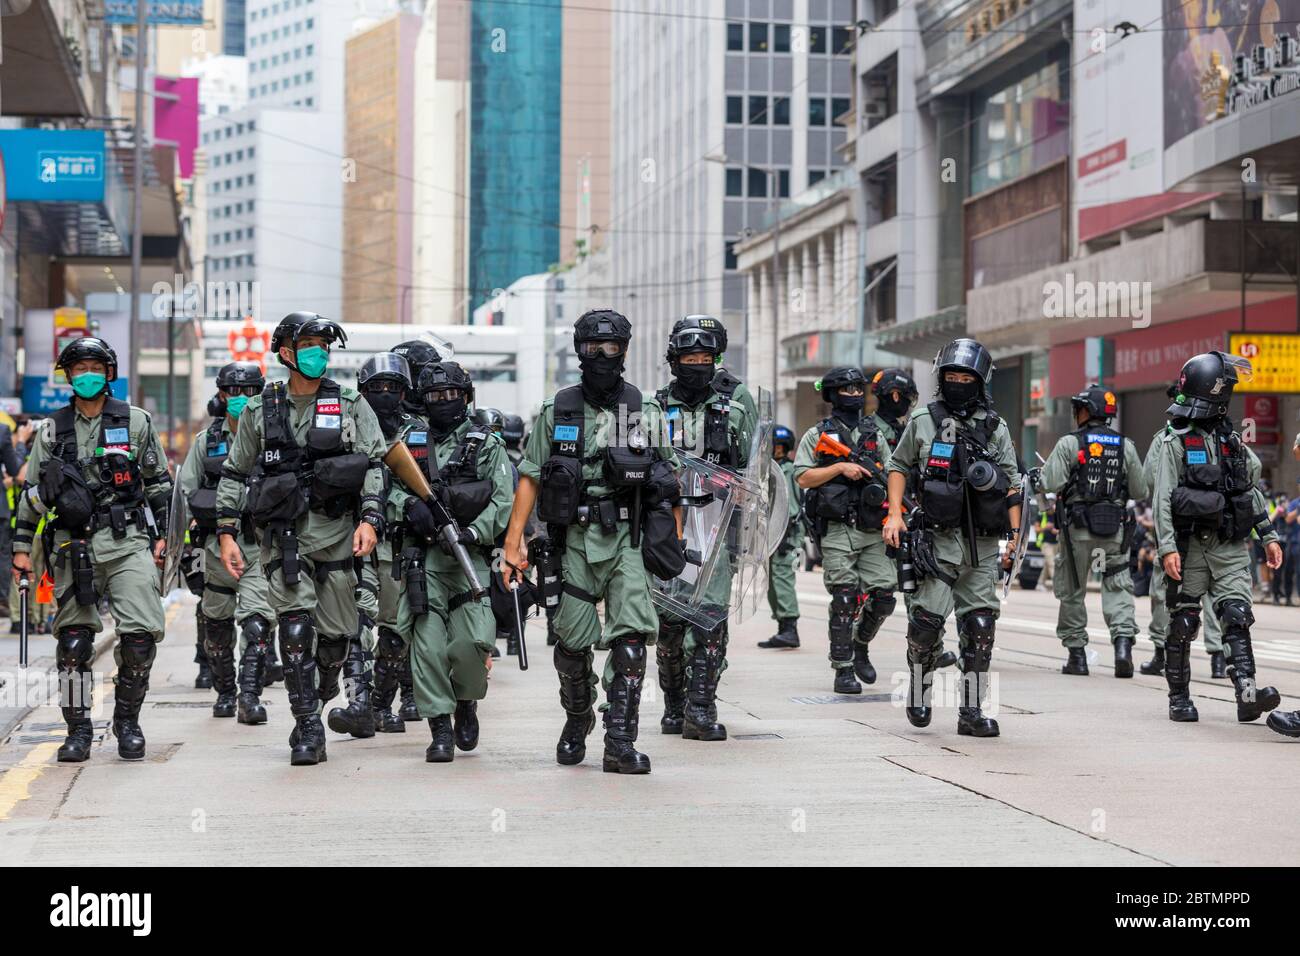 Central, Hong Kong. 27 May, 2020 Hong Kong Protest Anti-National Anthem Law. Police ofiicers clearing the streets. Credit: David Ogg / Alamy Live News Stock Photo